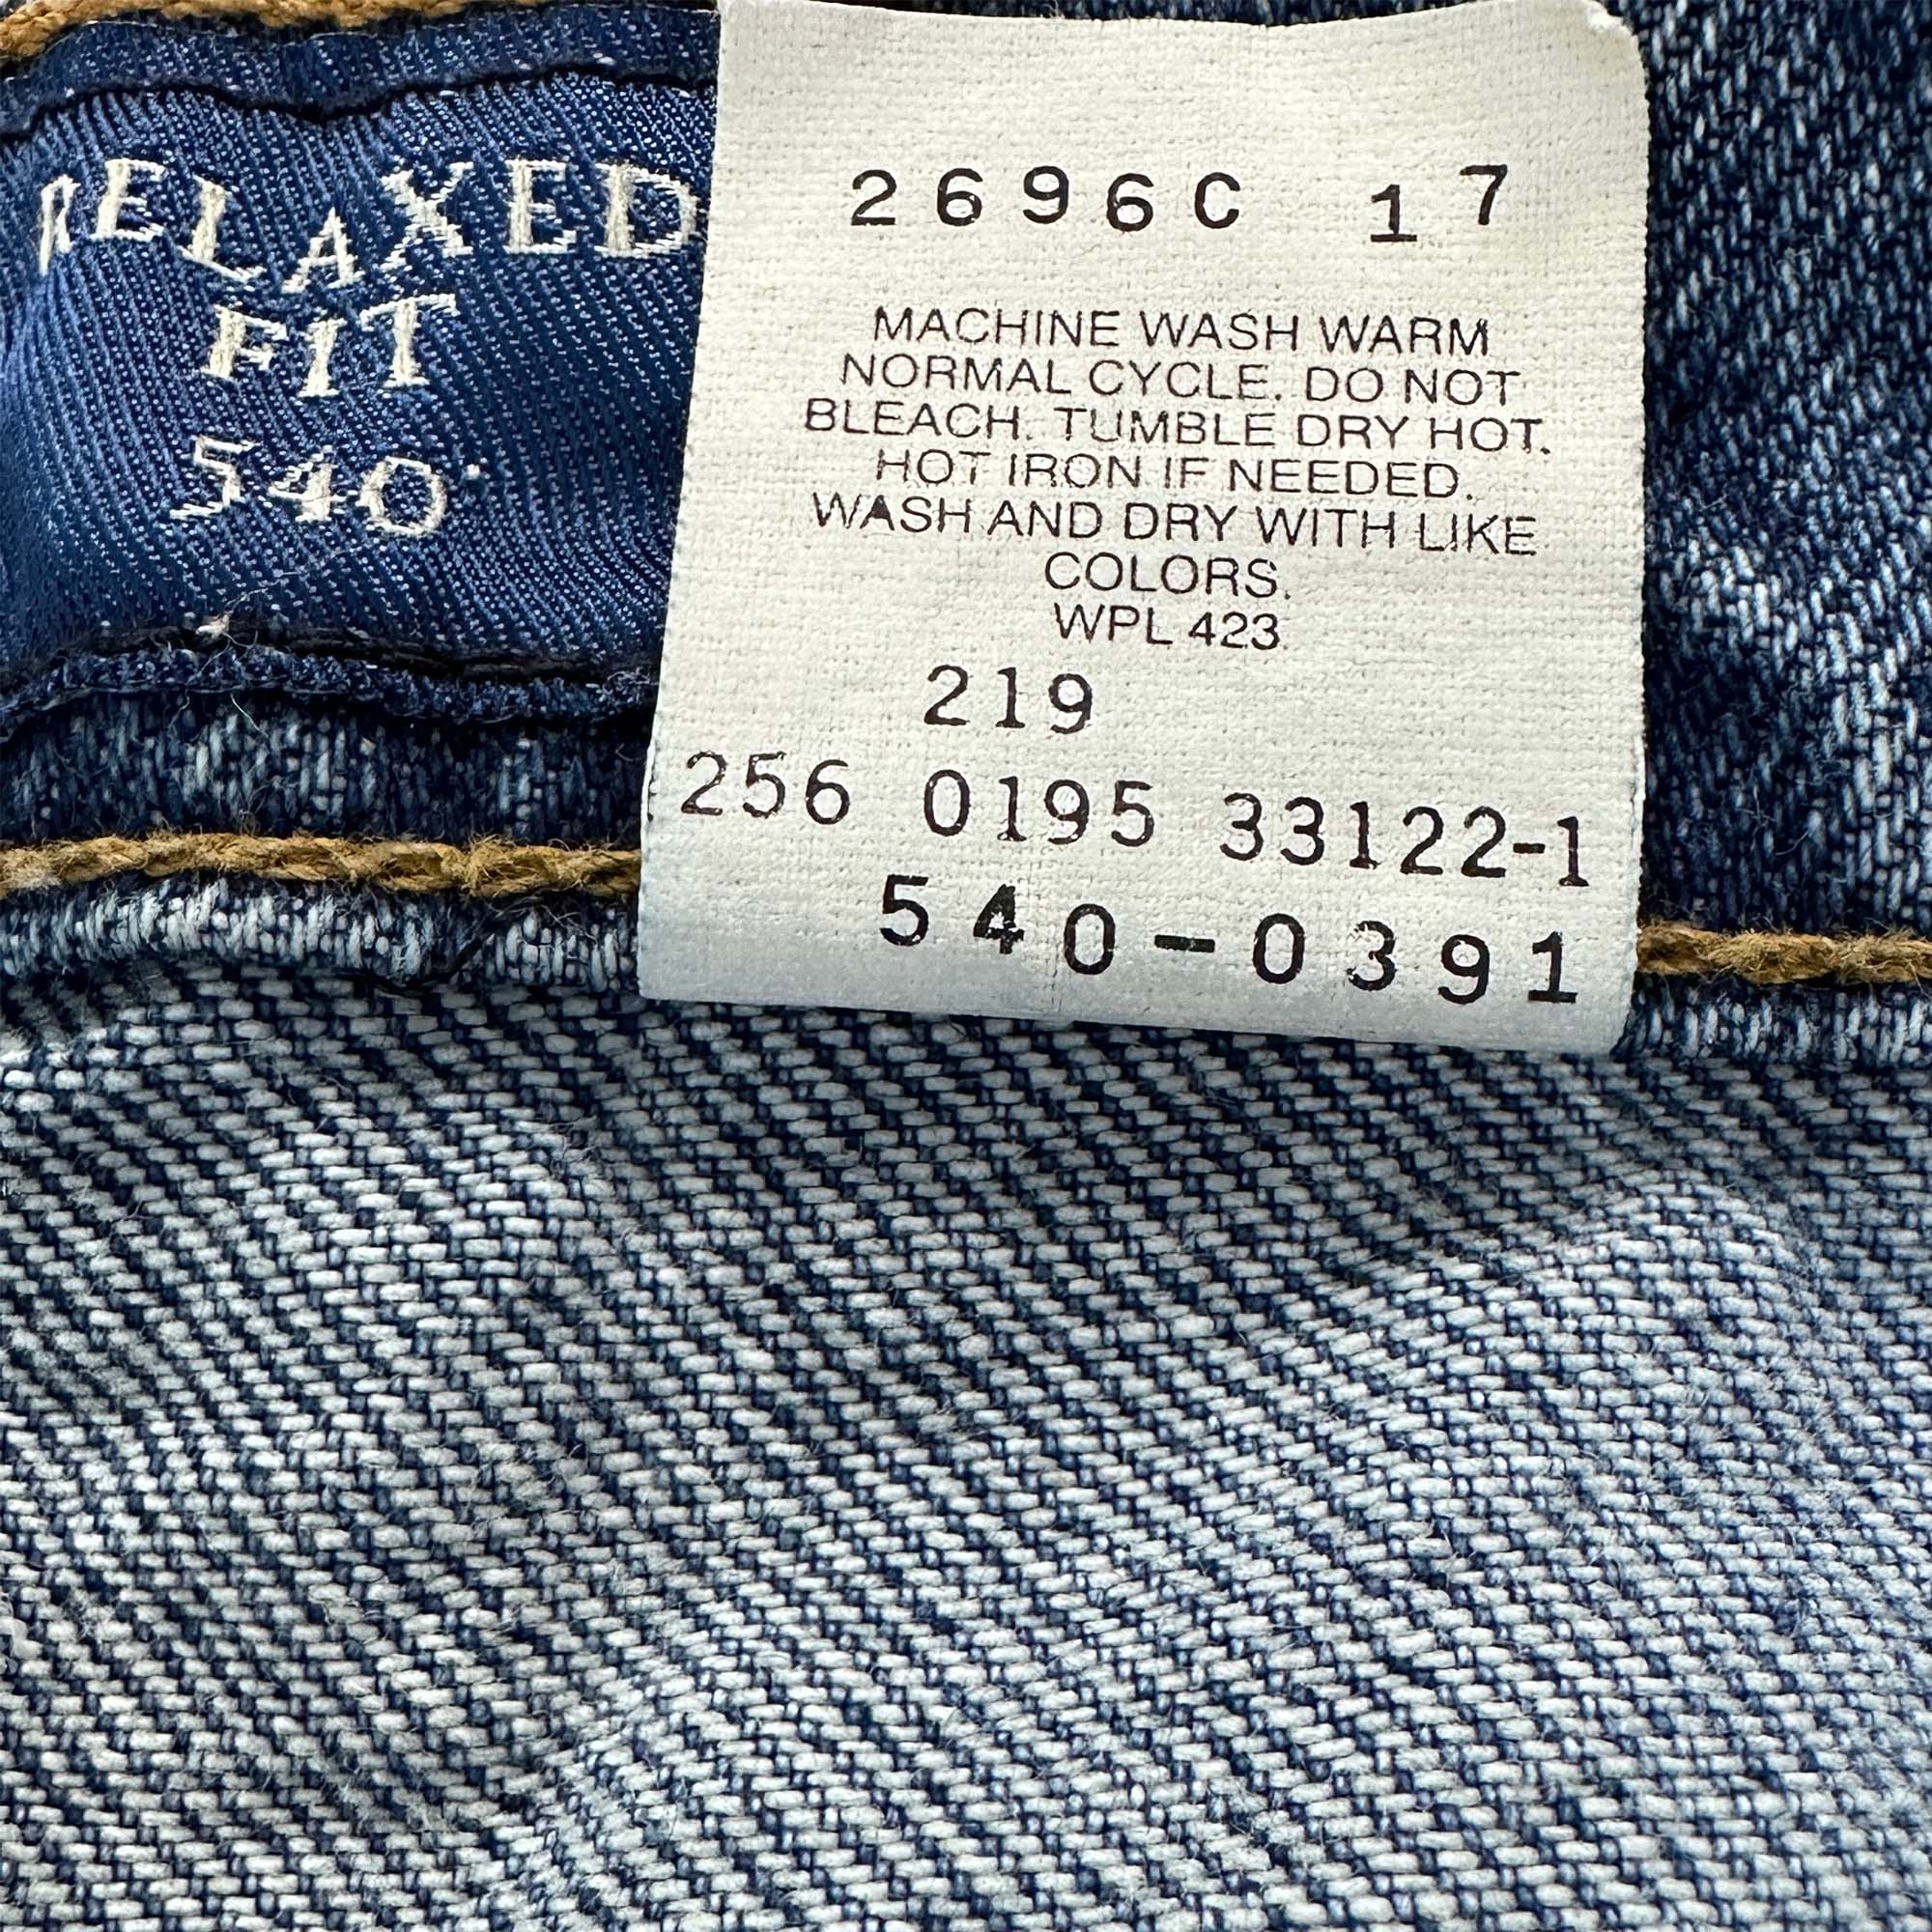 Vintage Levi's Signature 540 Tapered - Measured Size 36x34 Great Lakes Reclaimed Denim